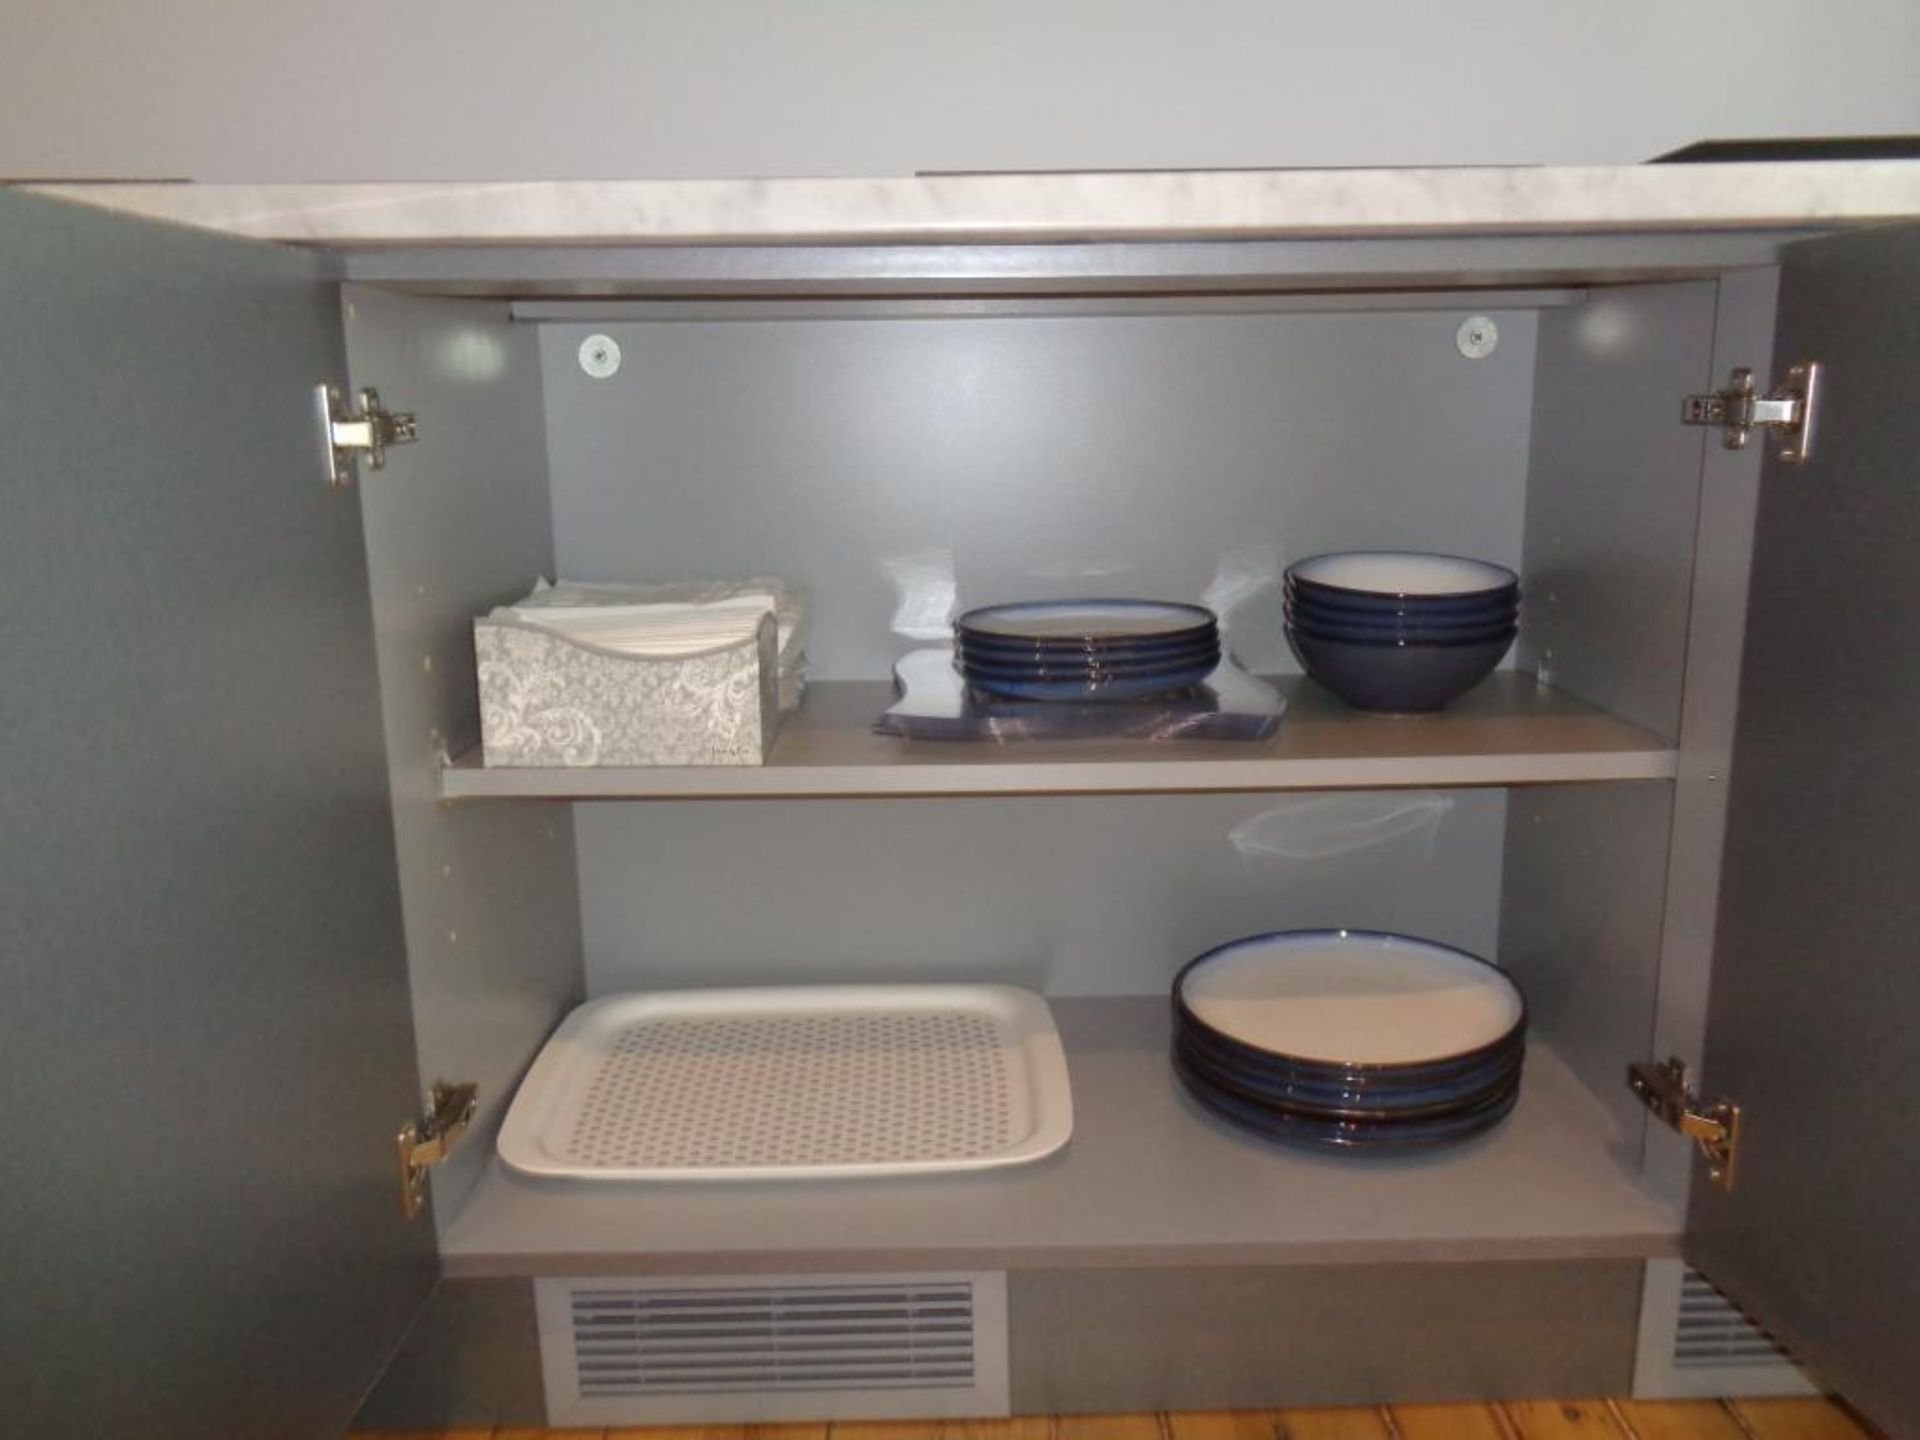 LOT OF: FIRST FLOOR CONFERENCE ROOM PLACE SETTINGS, FLATWARE, CADDY, GLASSES, TRAY - Image 2 of 7